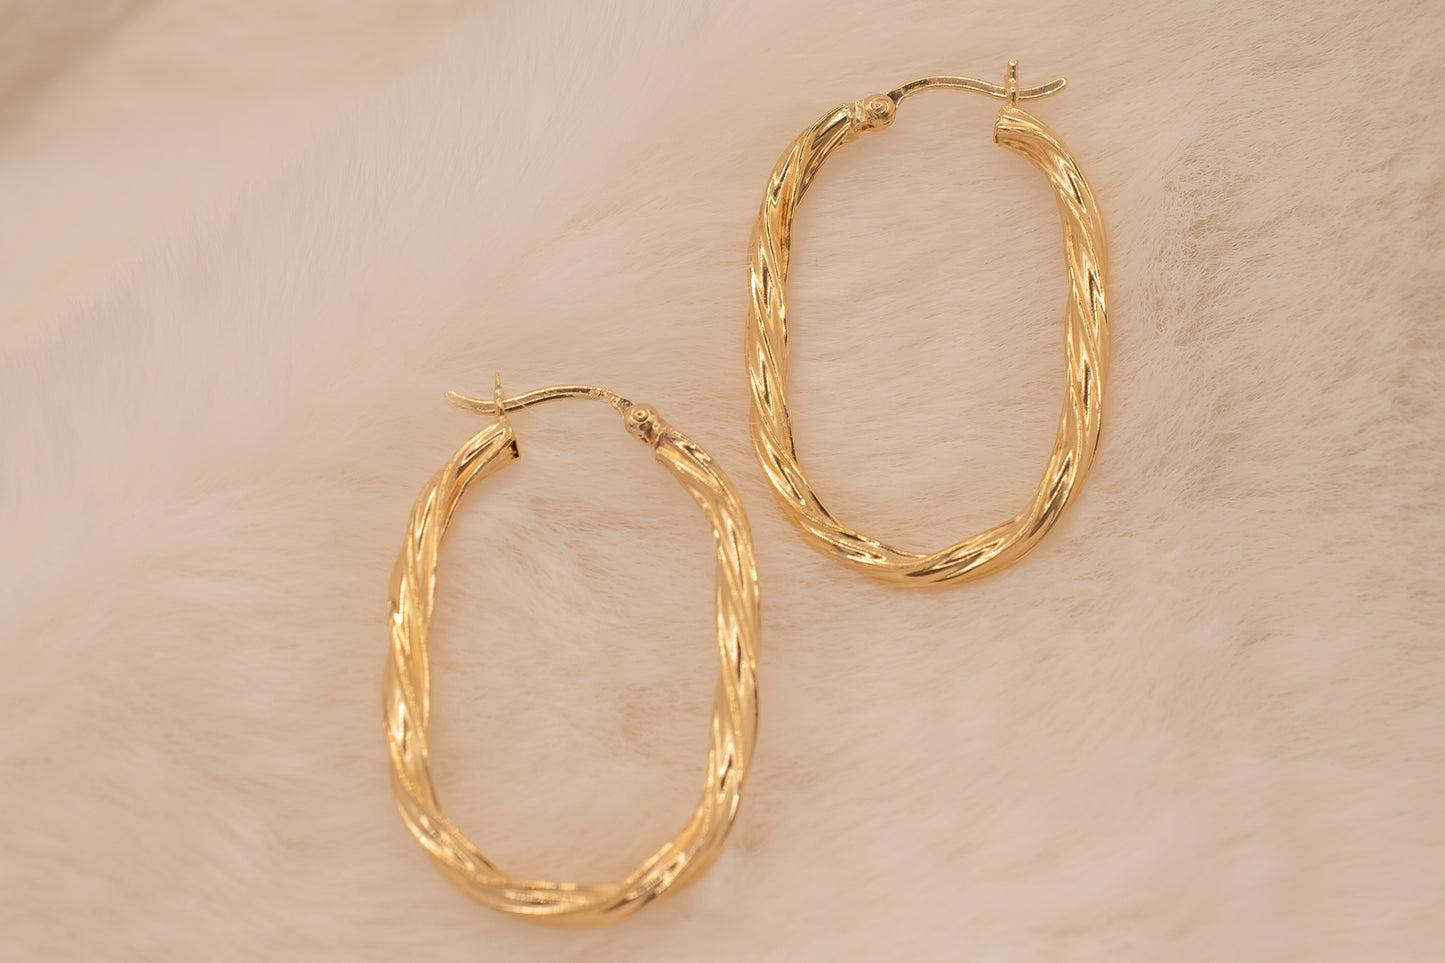 90s Vintage 14k Yellow Gold Long Oval Rope Style Hoops 1.3" Drop Length